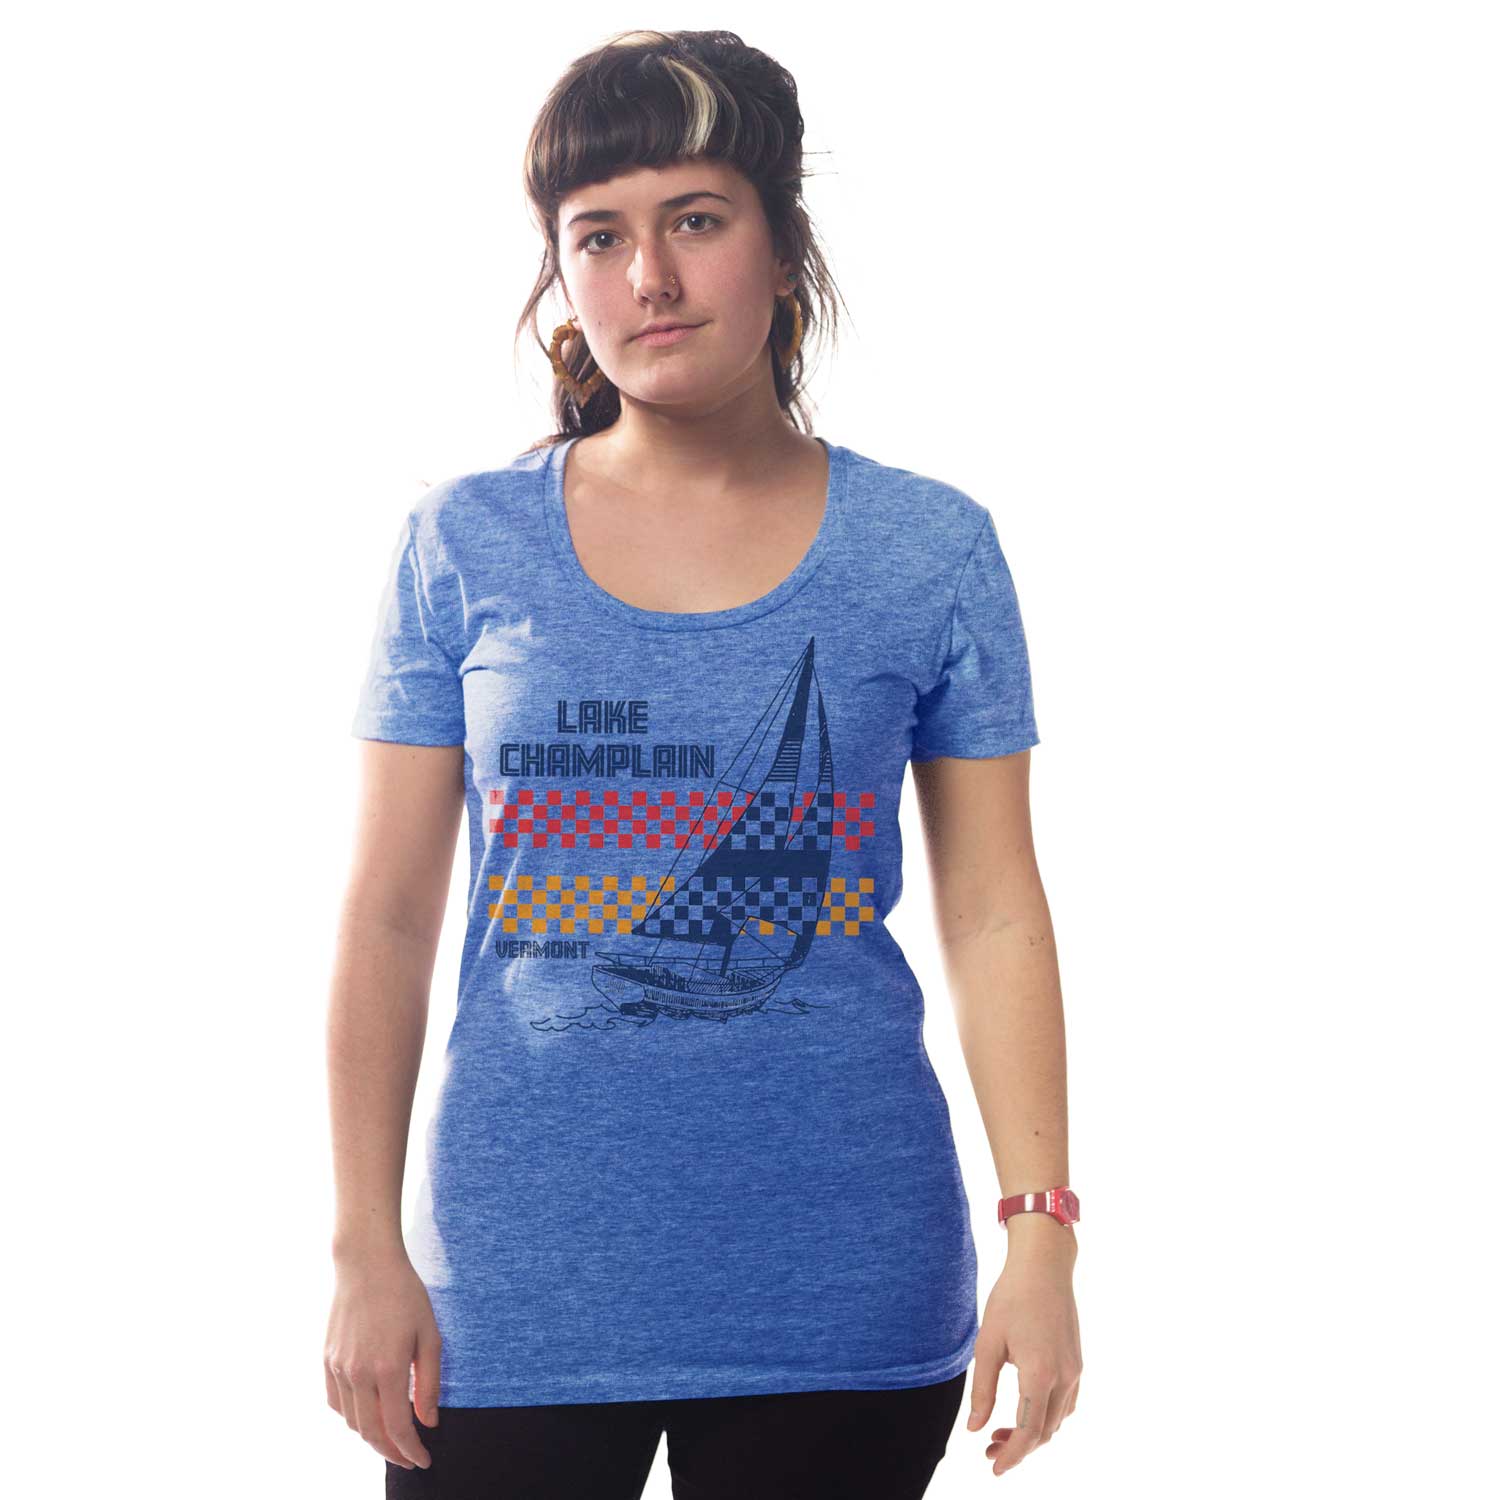 Women's Lake Champlain Vermont Vintage Inspired Scoopneck T-shirt | Cool Retro Sailboat Graphic Tee | Solid Threads